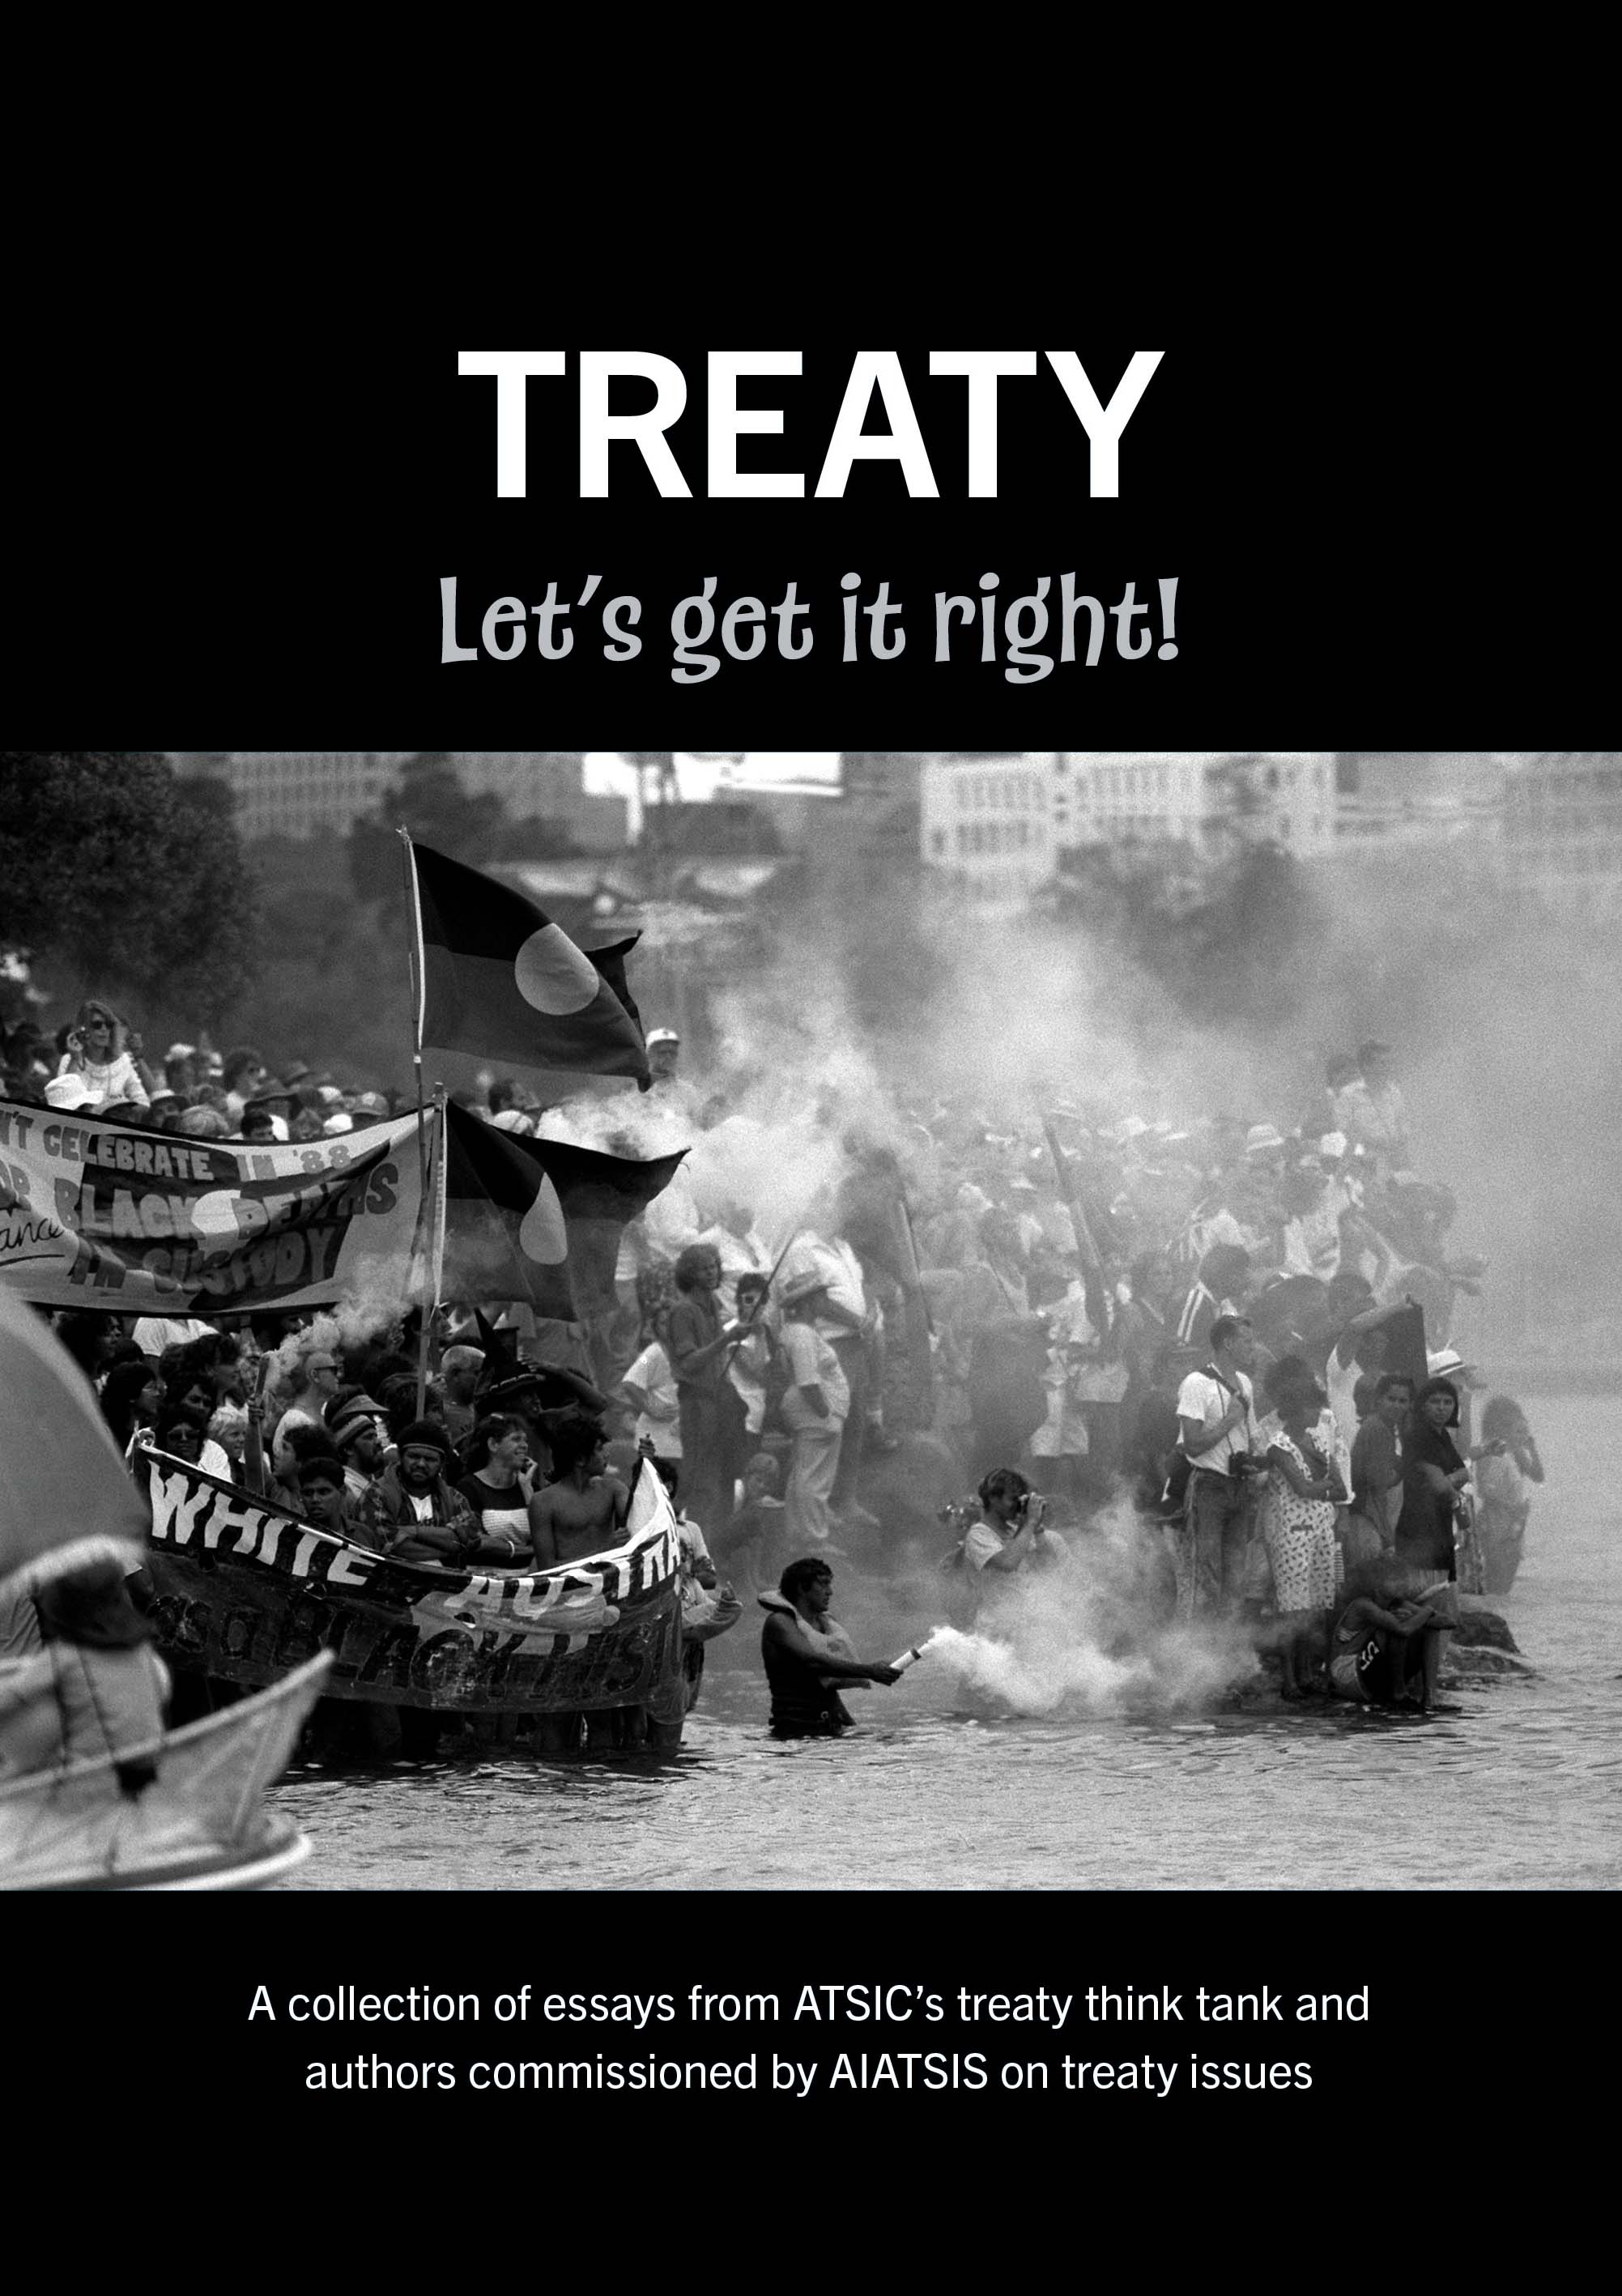 Treaty! Let's get it right cover